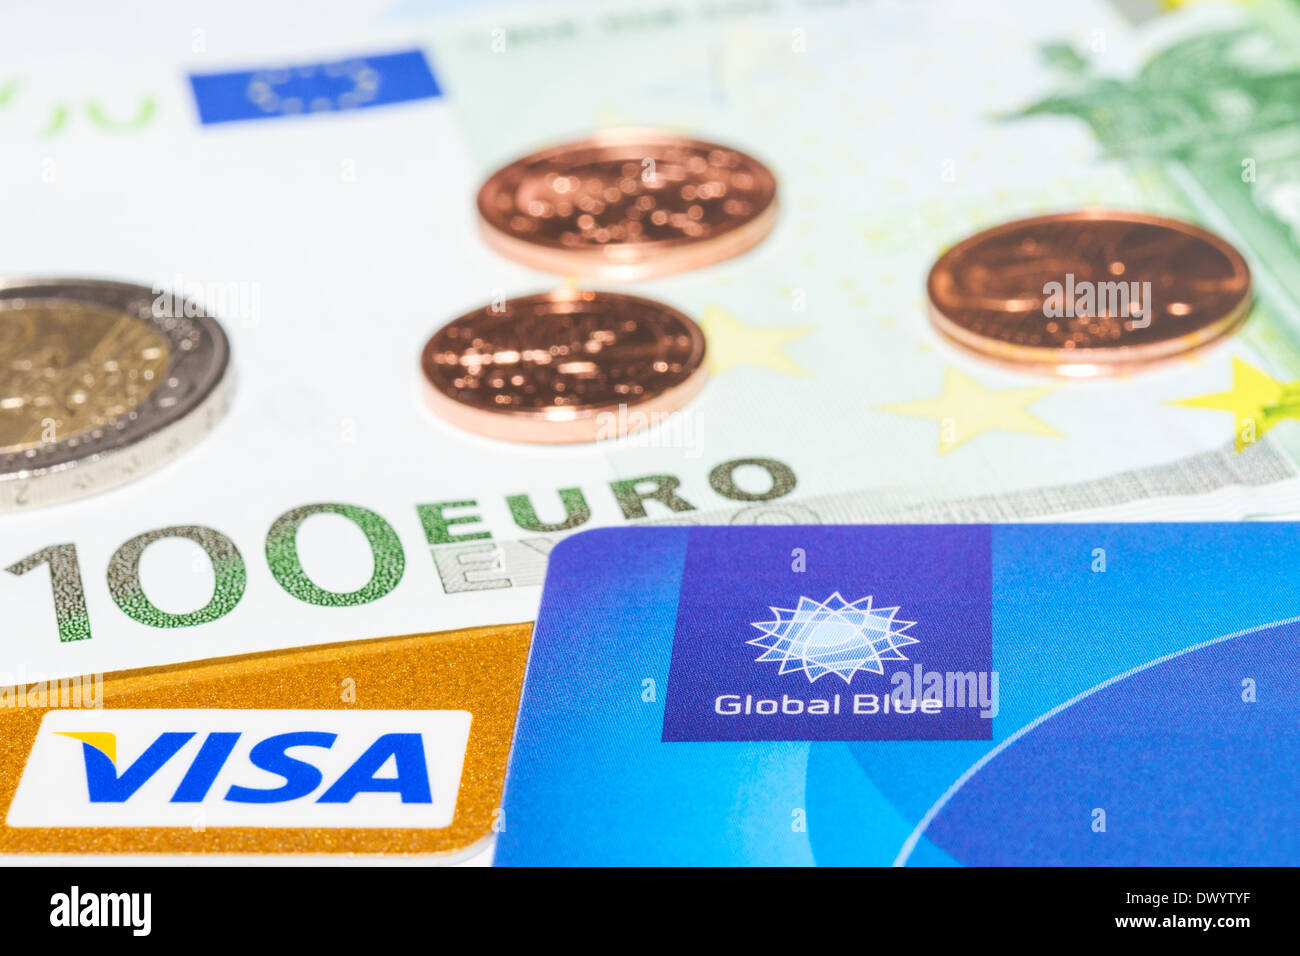 MUNICH, GERMANY - FEBRUARY 23, 2014: 'Global Blue', 'Visa' credit card and cash money - your way for tax free shopping. Stock Photo